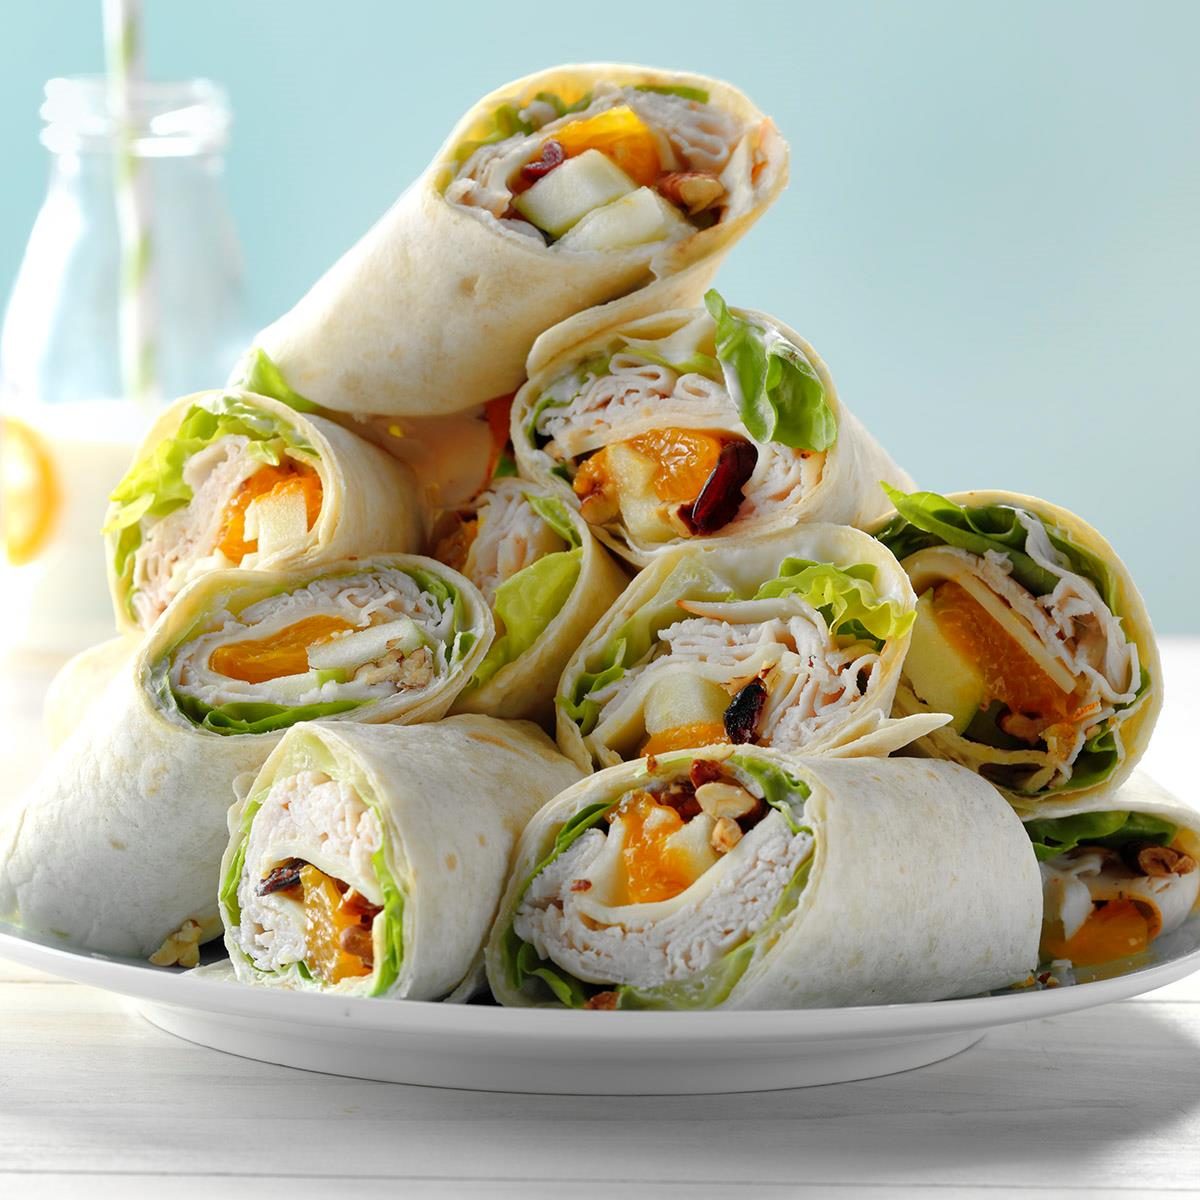 How To Make Turkey Wraps At Home